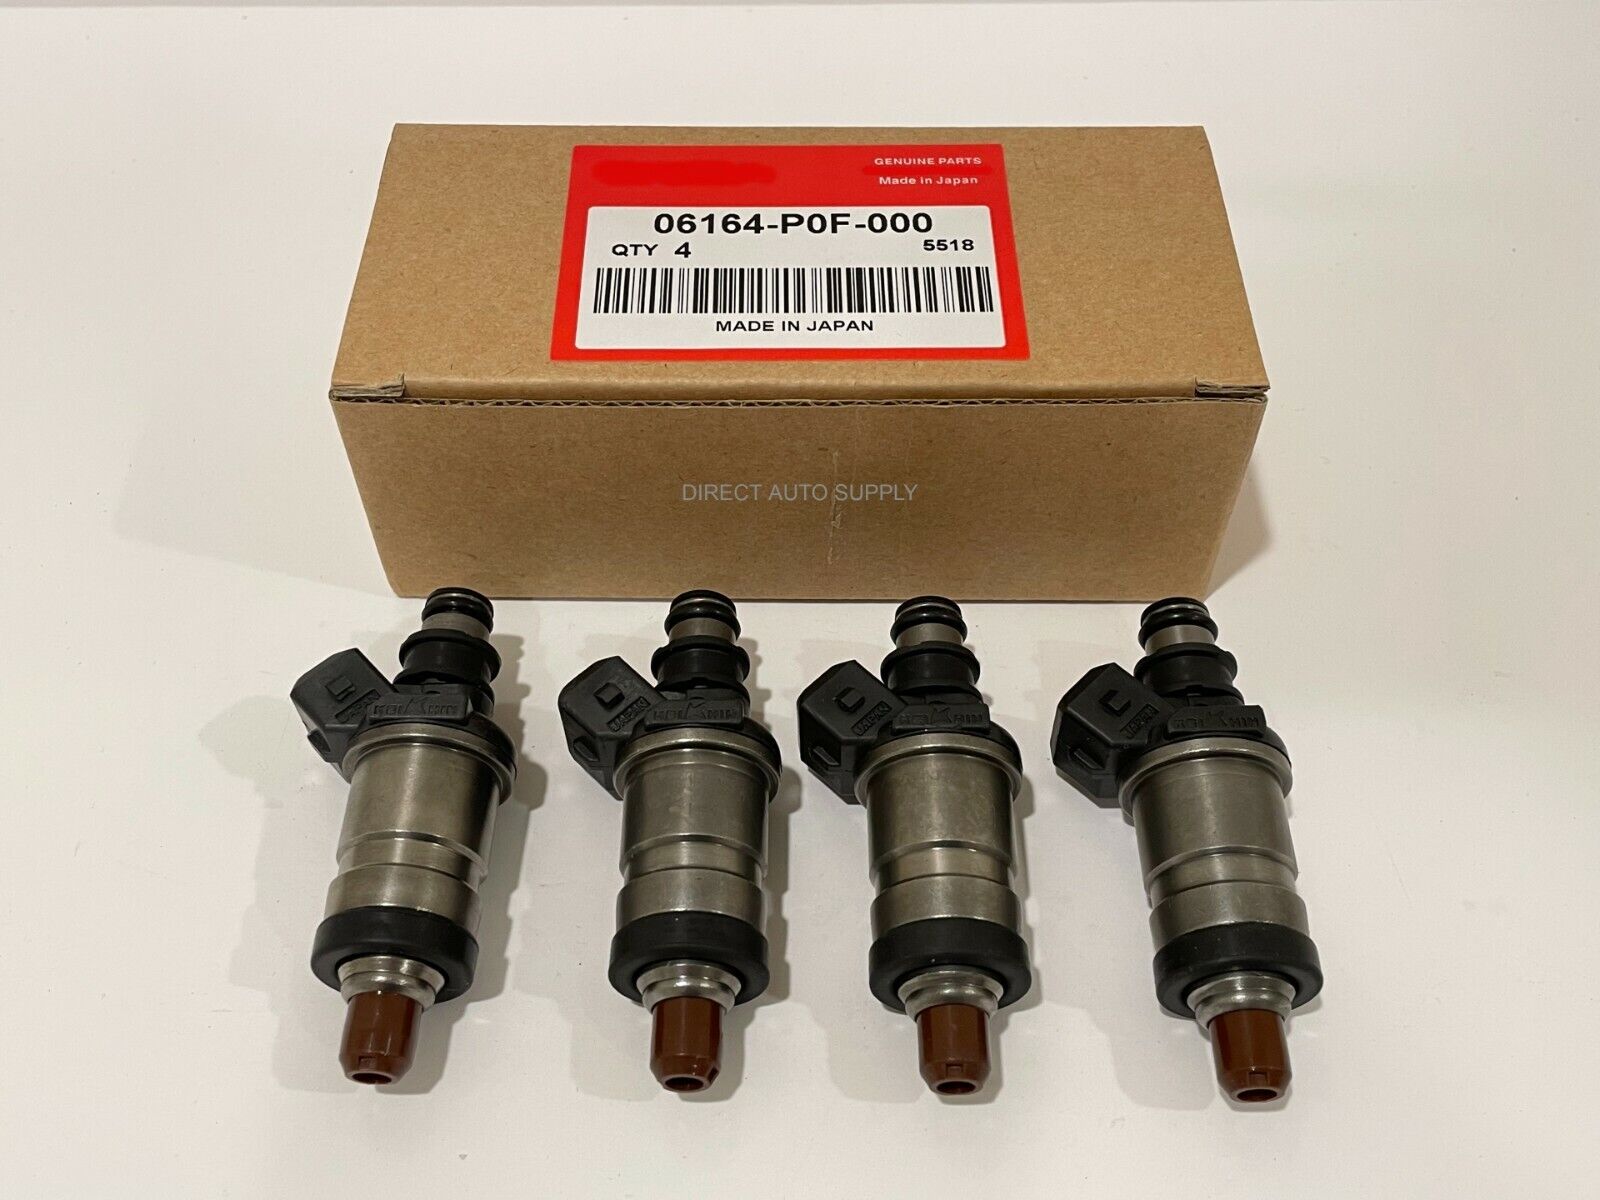 4 OEM NEW FUEL INJECTORS 06164-P0F-000 FOR 93-96 PRELUDE 2.2L